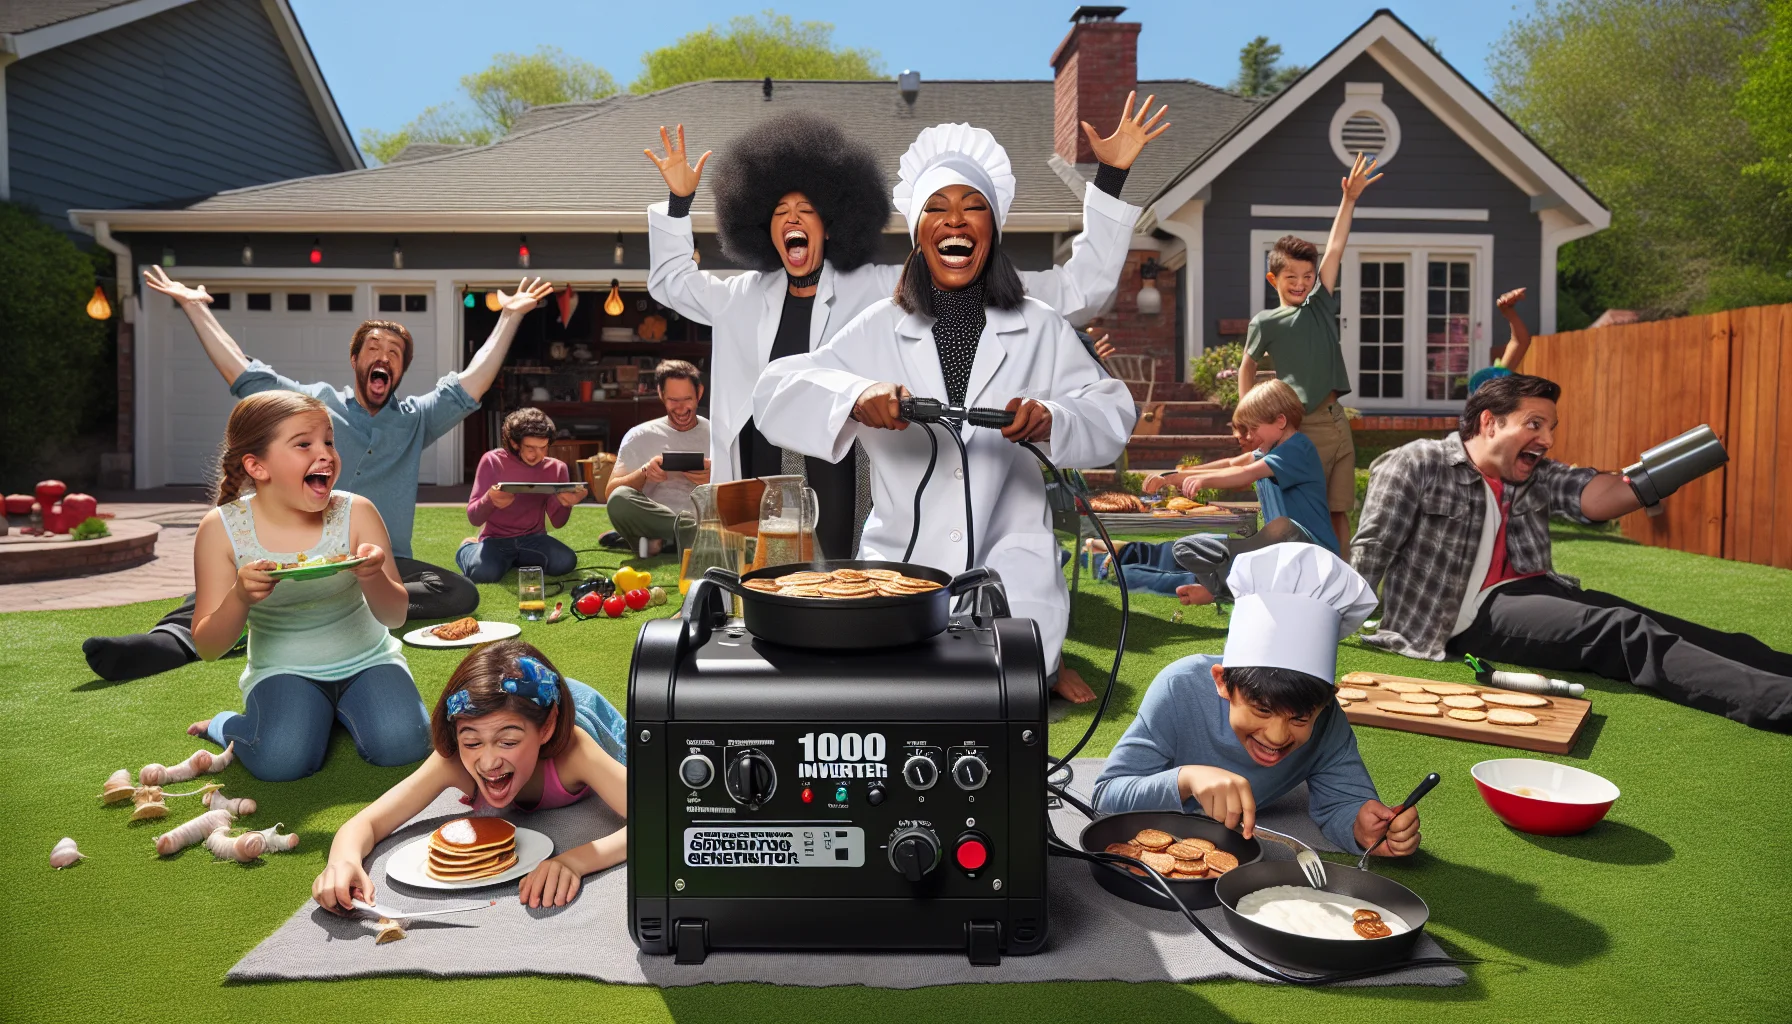 Create a playful, comical scene involving a 1000-watt inverter generator. On a sunny day, in a picturesque suburban backyard, there's a cheerful assembly of people from all walks of life. A Black woman dressed as a scientist laughs excitedly as she demonstrates how the generator works. A Caucasian man in a fluffy chef's hat uses the power generated to cook pancakes on an electric griddle. South Asian children spread out on the lawn, engrossed in a video game directly powered by the generator. Despite the different activities, everyone is united by the shared joy of generating electricity.